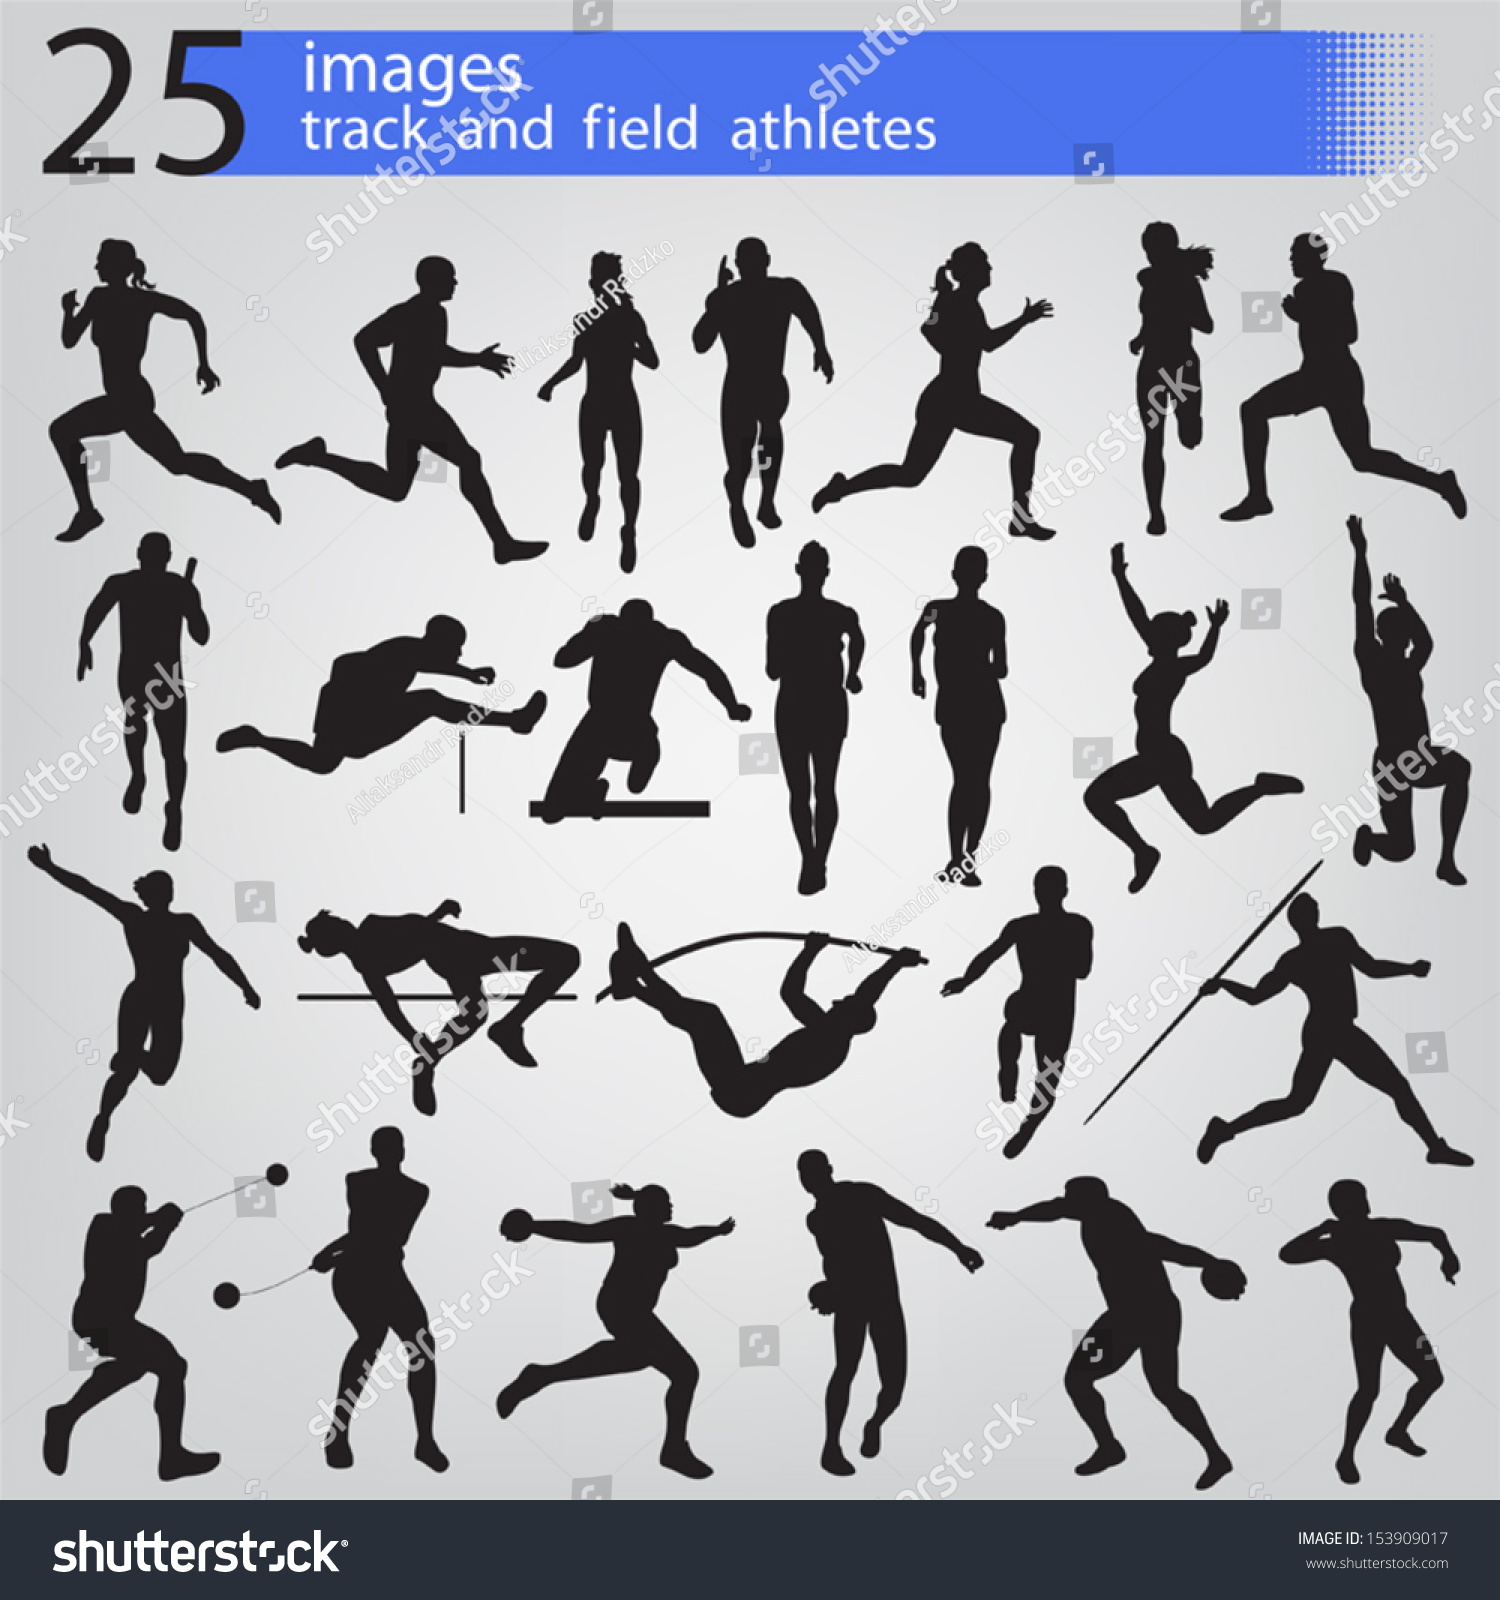 track and field clipart free vector - photo #32